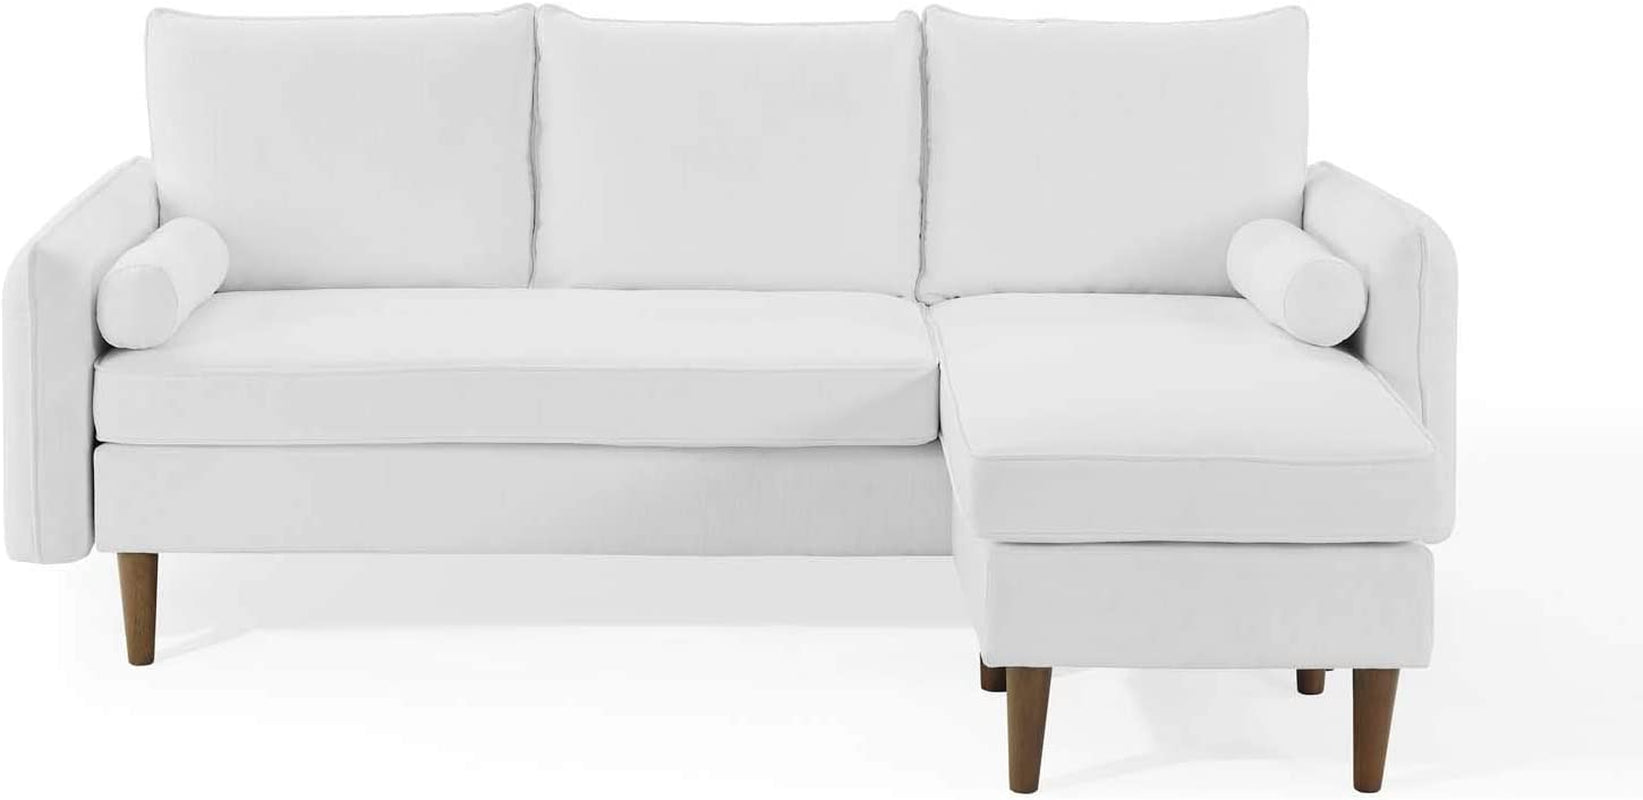 Revive Right or Left Sectional Modern Upholstered Fabric Sofa Couch, White - LynkHouse